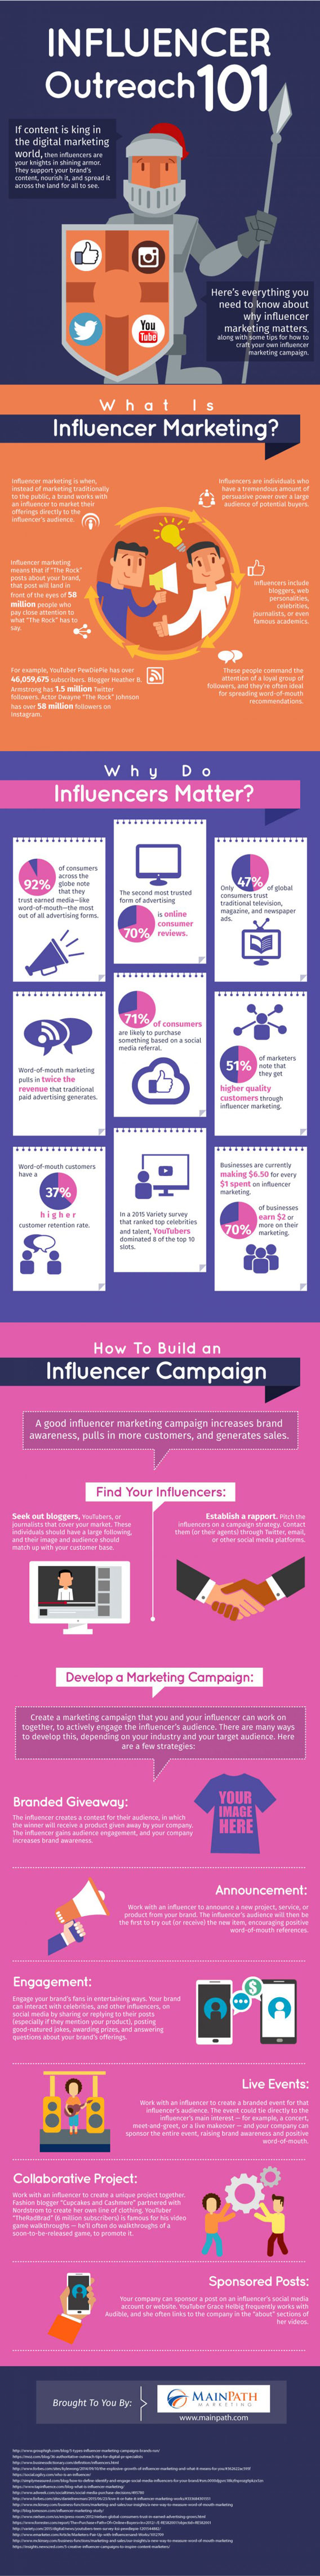 reaching-out-to-influencers